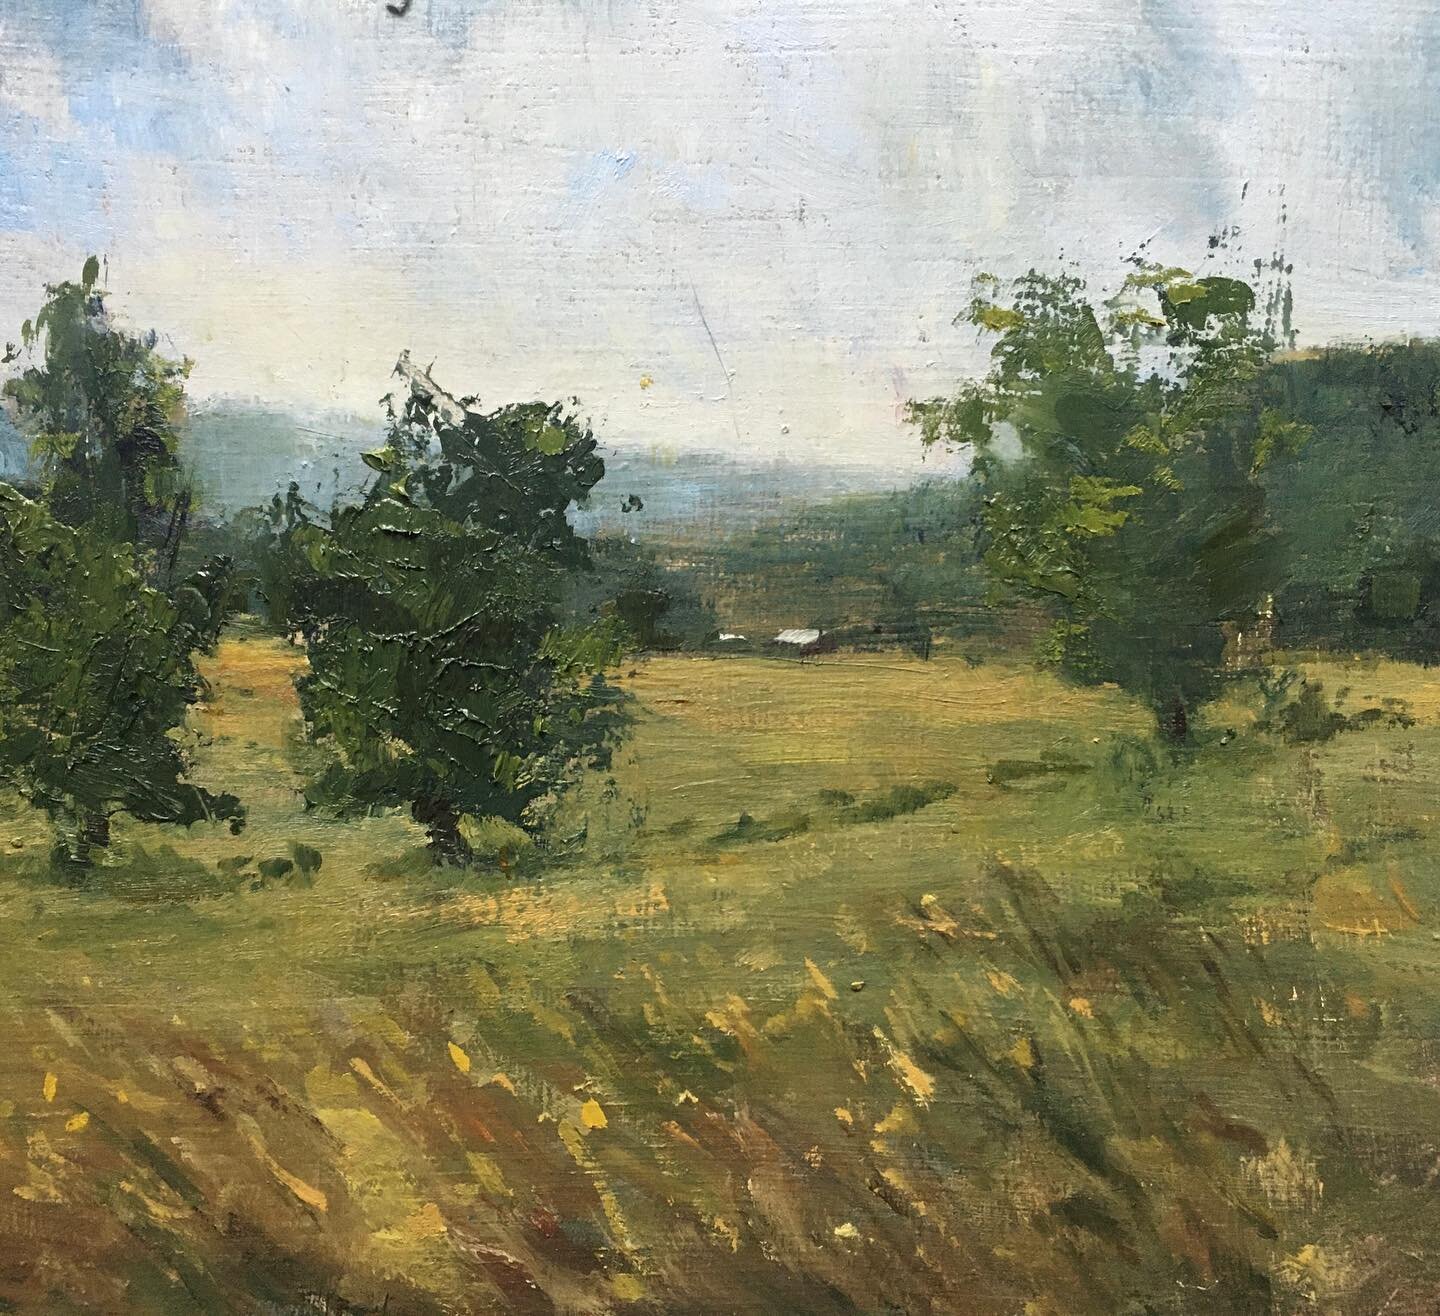 r. Brown&rsquo;s field. One of my favorite views in the world. 

#oilpainting #impressionism #beautifulplaces #artlovers #northcarolinaartist #raleighartist #caryartist #landscapepainting #discovernorthcarolina #discovernc #artcollection #ncmountains